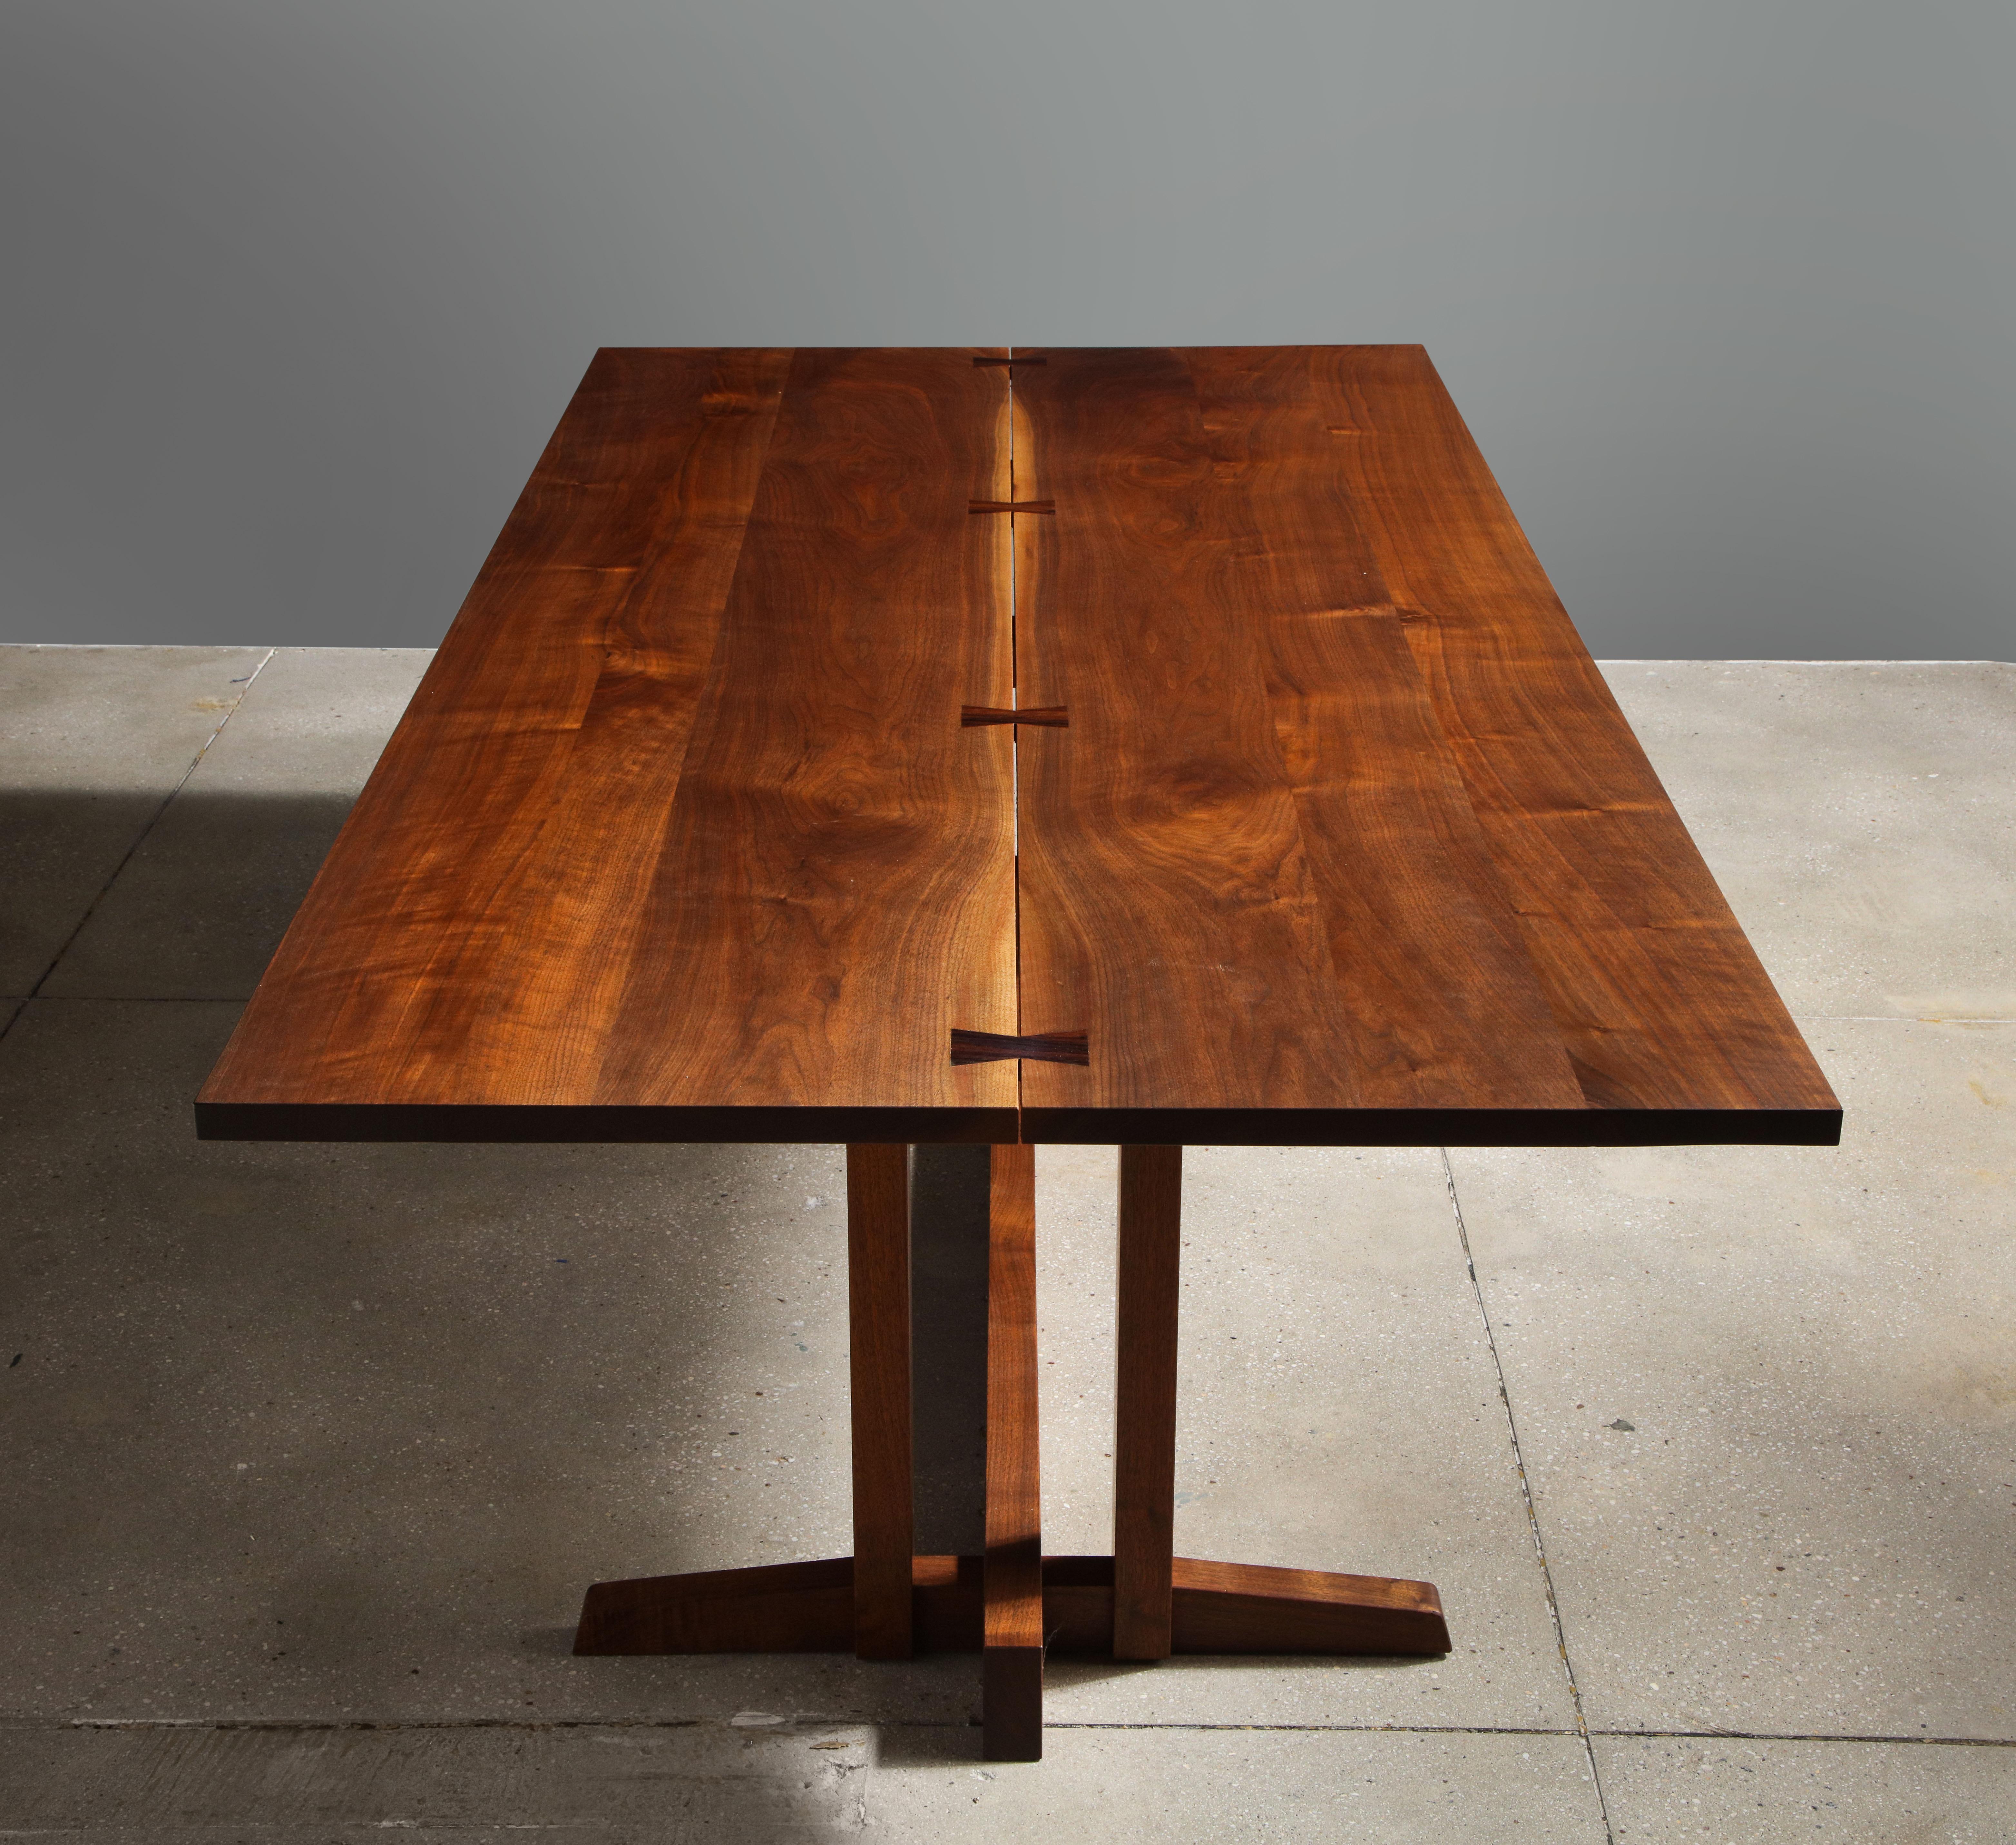 George Nakashima’s superb Frenchman’s Cove dining table walnut with four large rosewood butterflies.

Recently restored by Nakashima Studios.

Provenance includes all original purchase receipts and letter of authenticity from Nakashima